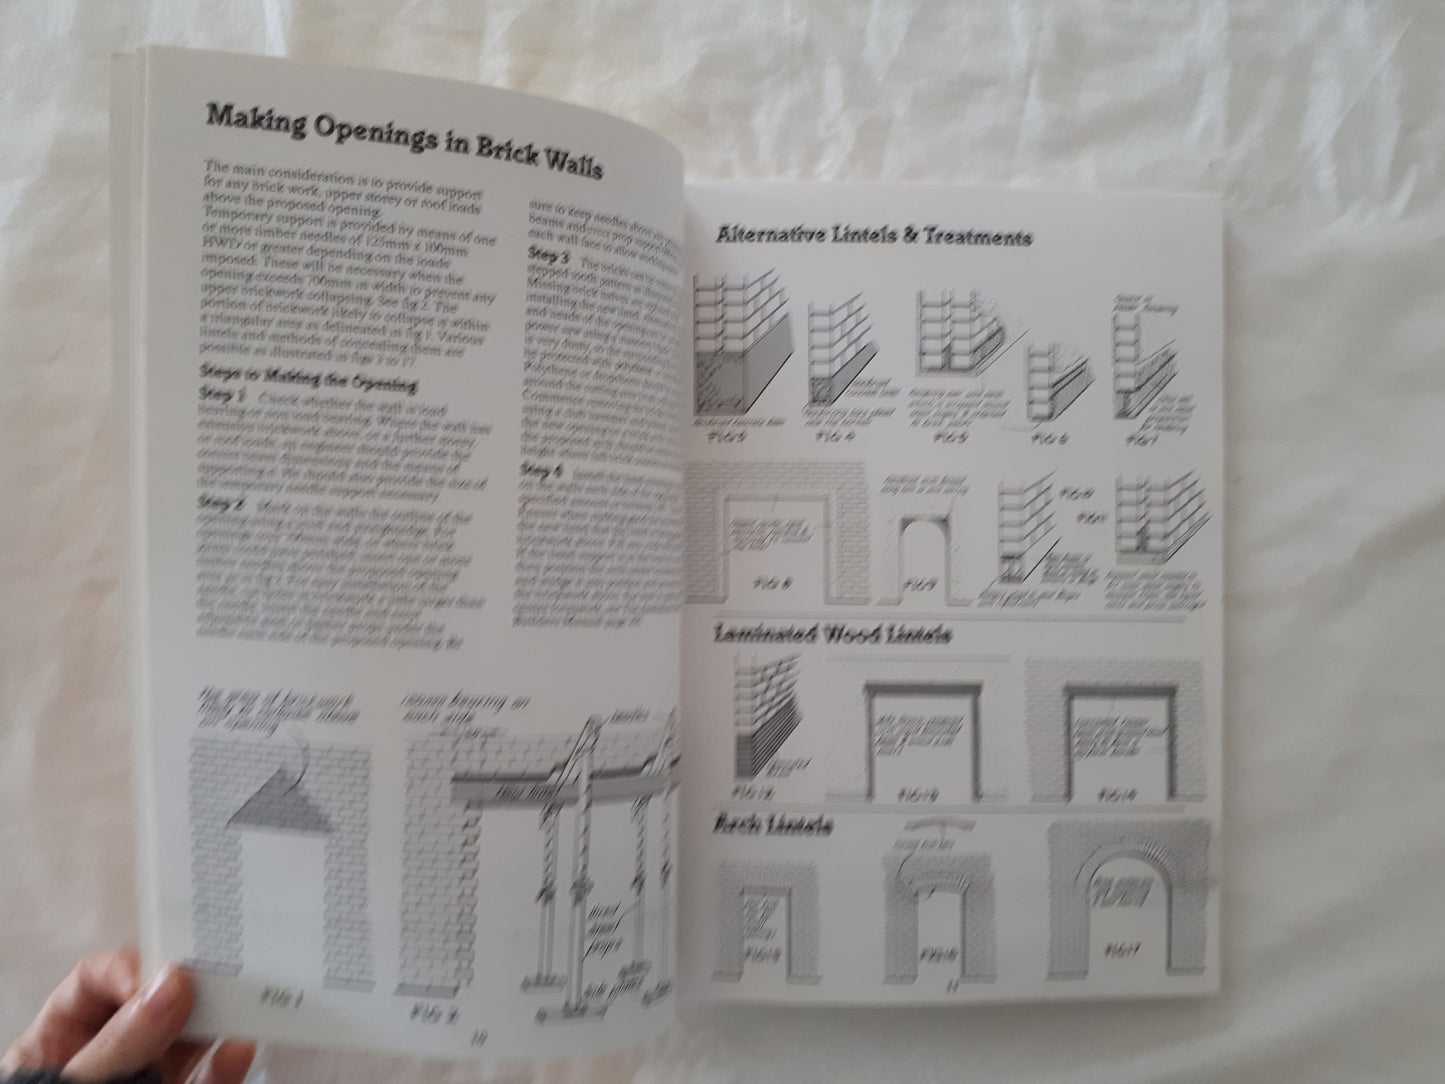 The Australian Renovator's Manual by Allan Staines